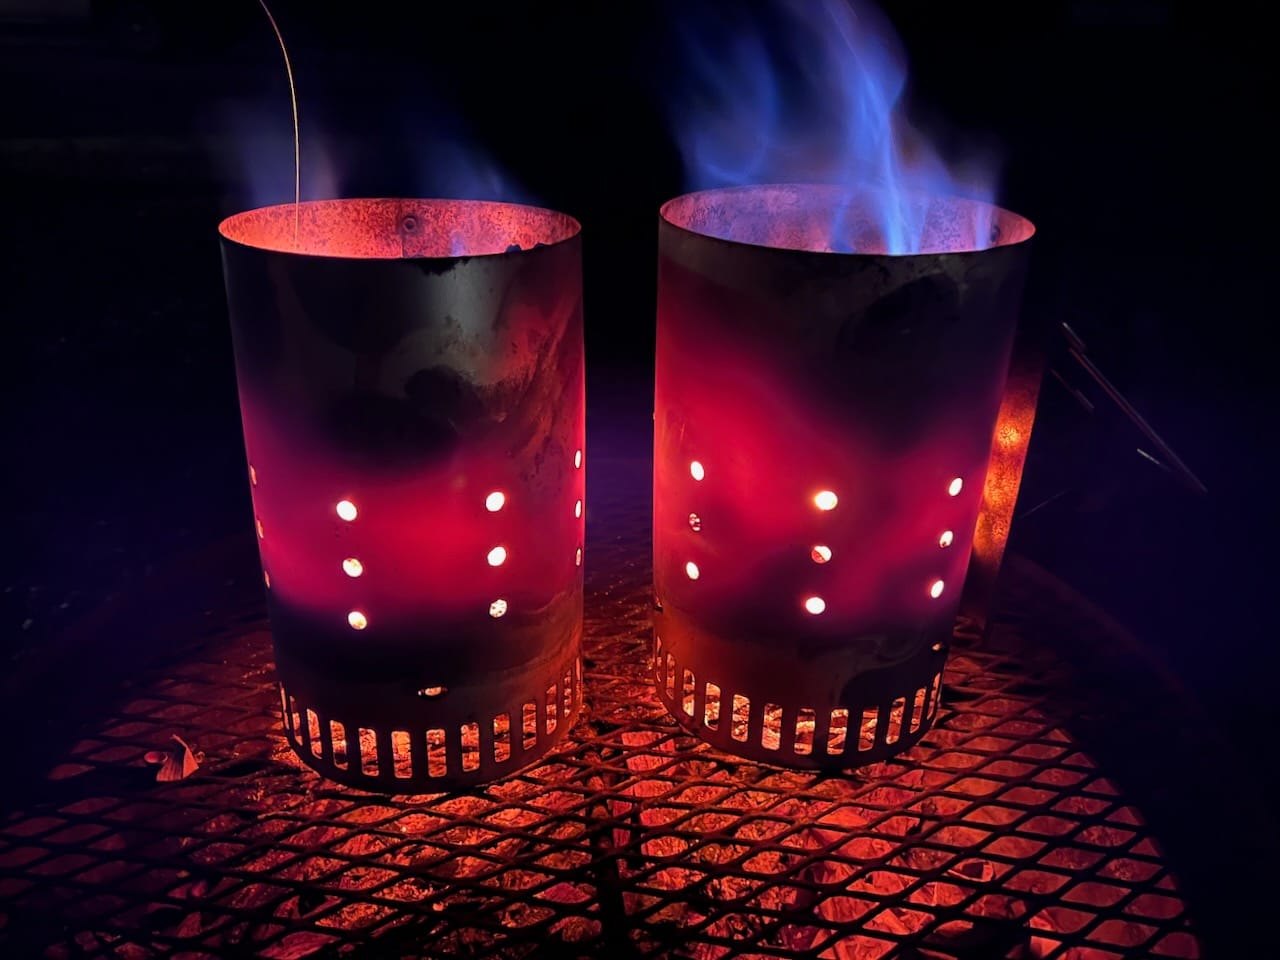 Two Weber charcoal chimneys full of hot coals.